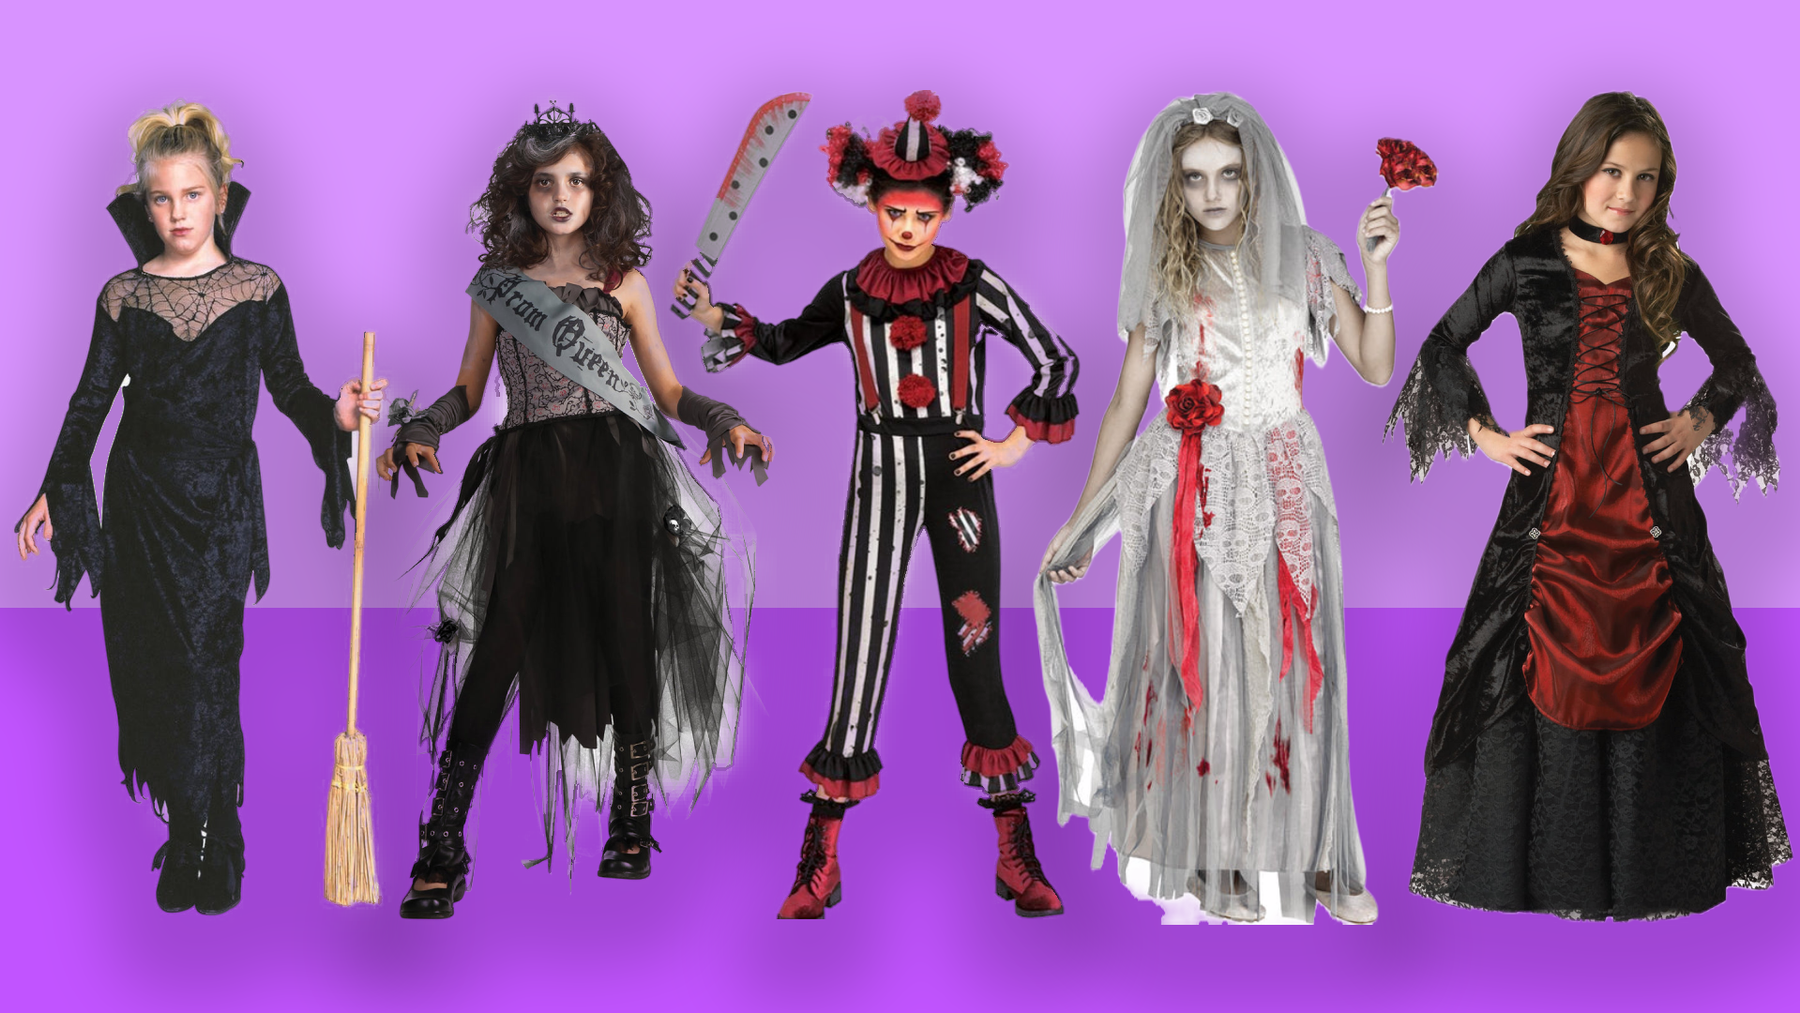 Trick or Treat in Style: Top 5 Girl's Halloween Costumes for the Perfect Halloween Look